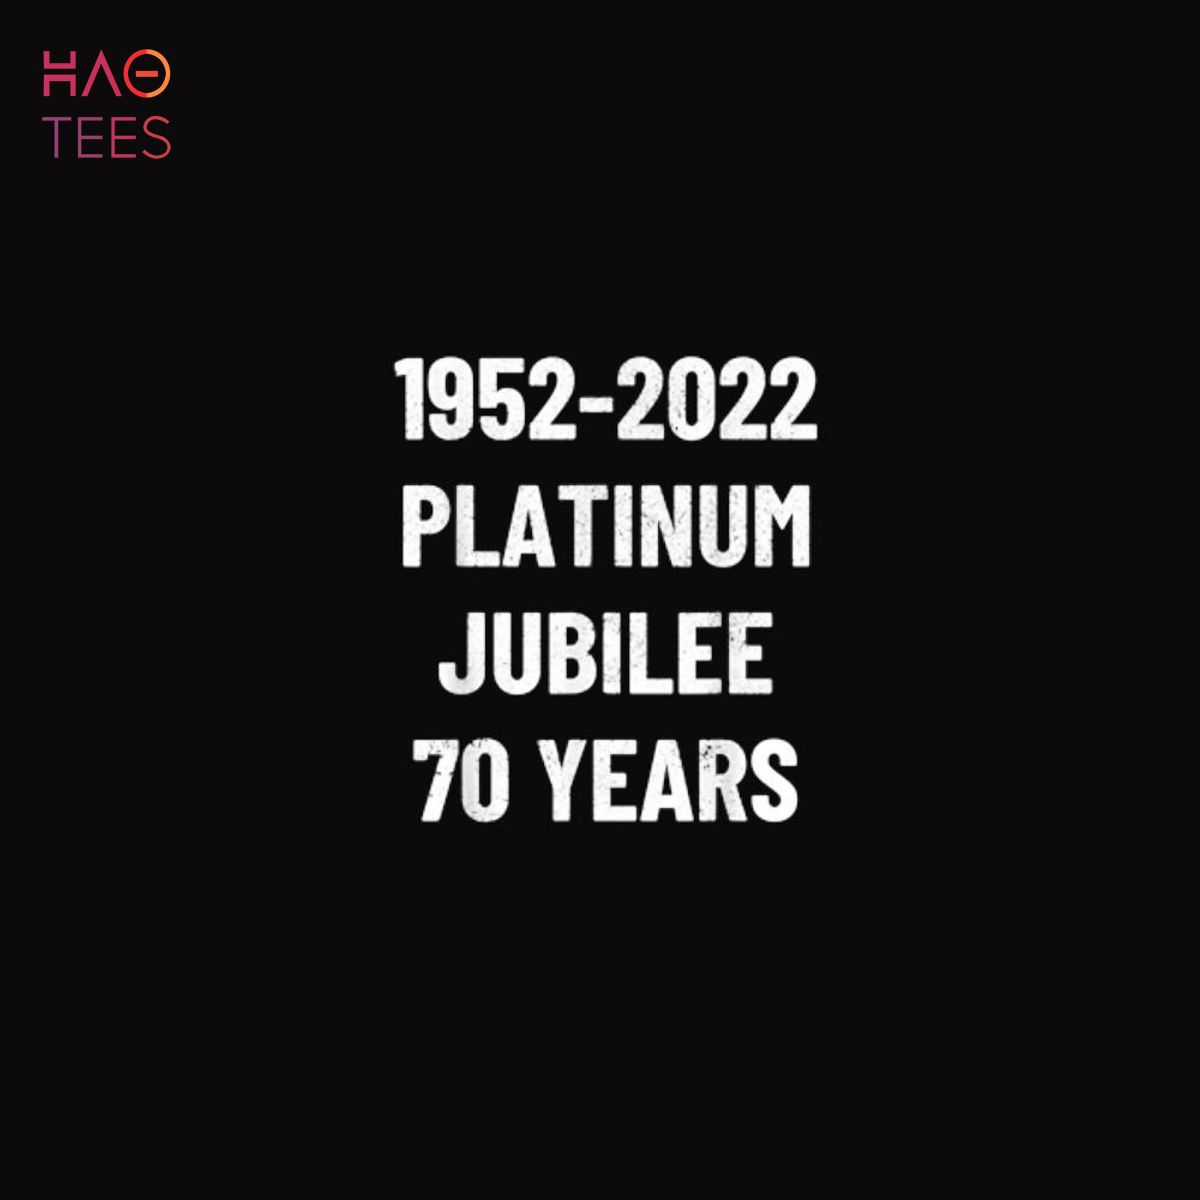 Queens Platinum Jubilee 70 Years 1952-2022 Funny Text Based